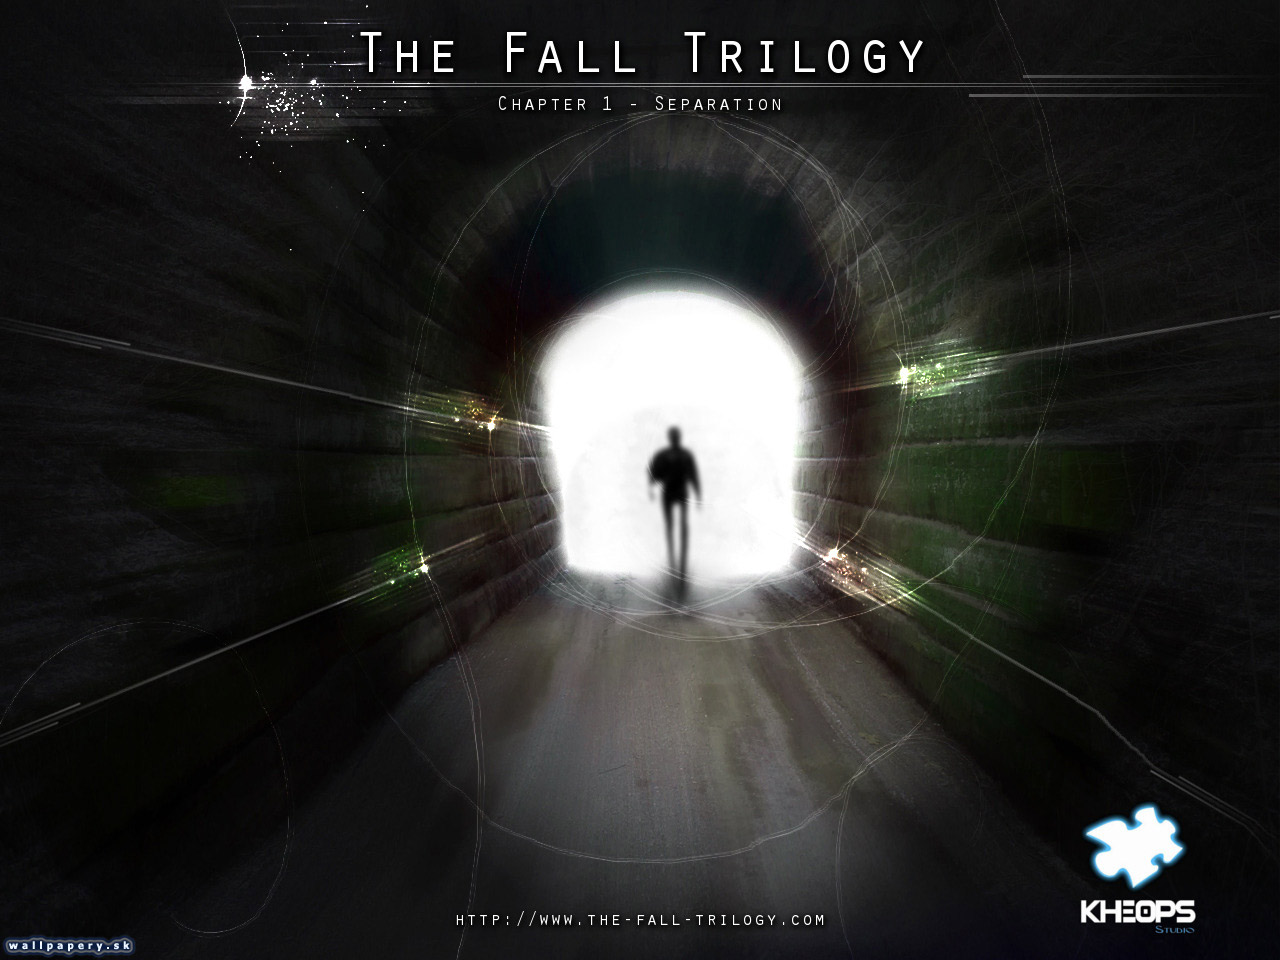 The Fall Trilogy - Chapter 1: Separation - wallpaper 1